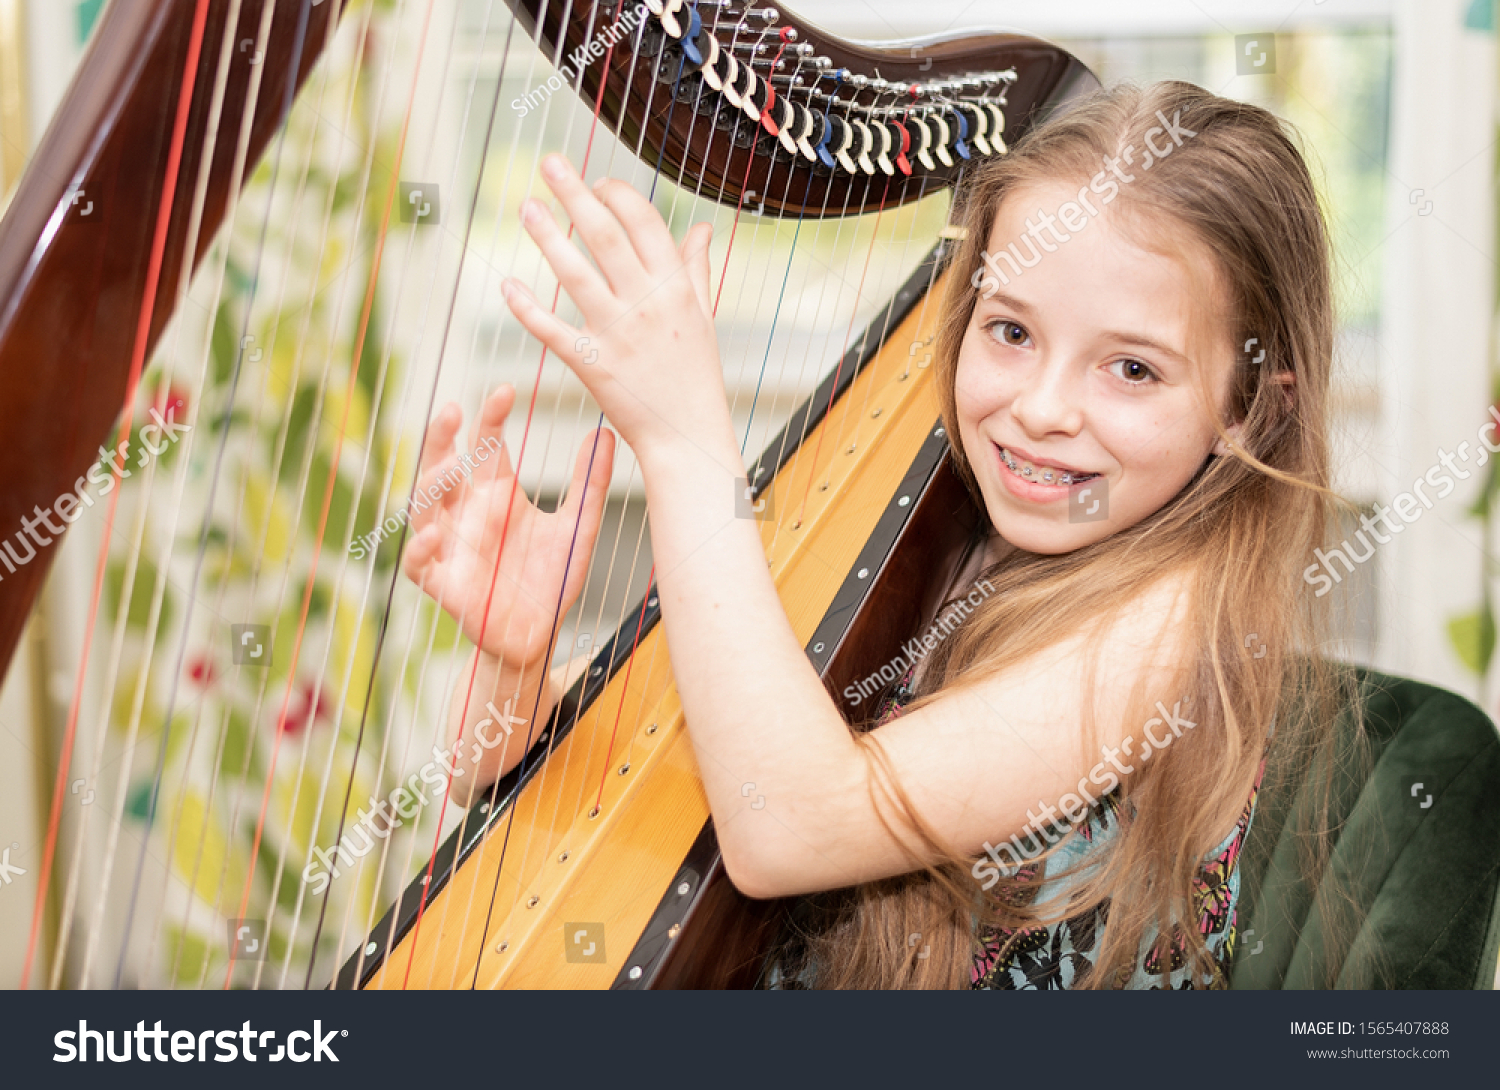 A young girl plays harp and looks at the camera with a smile #1565407888